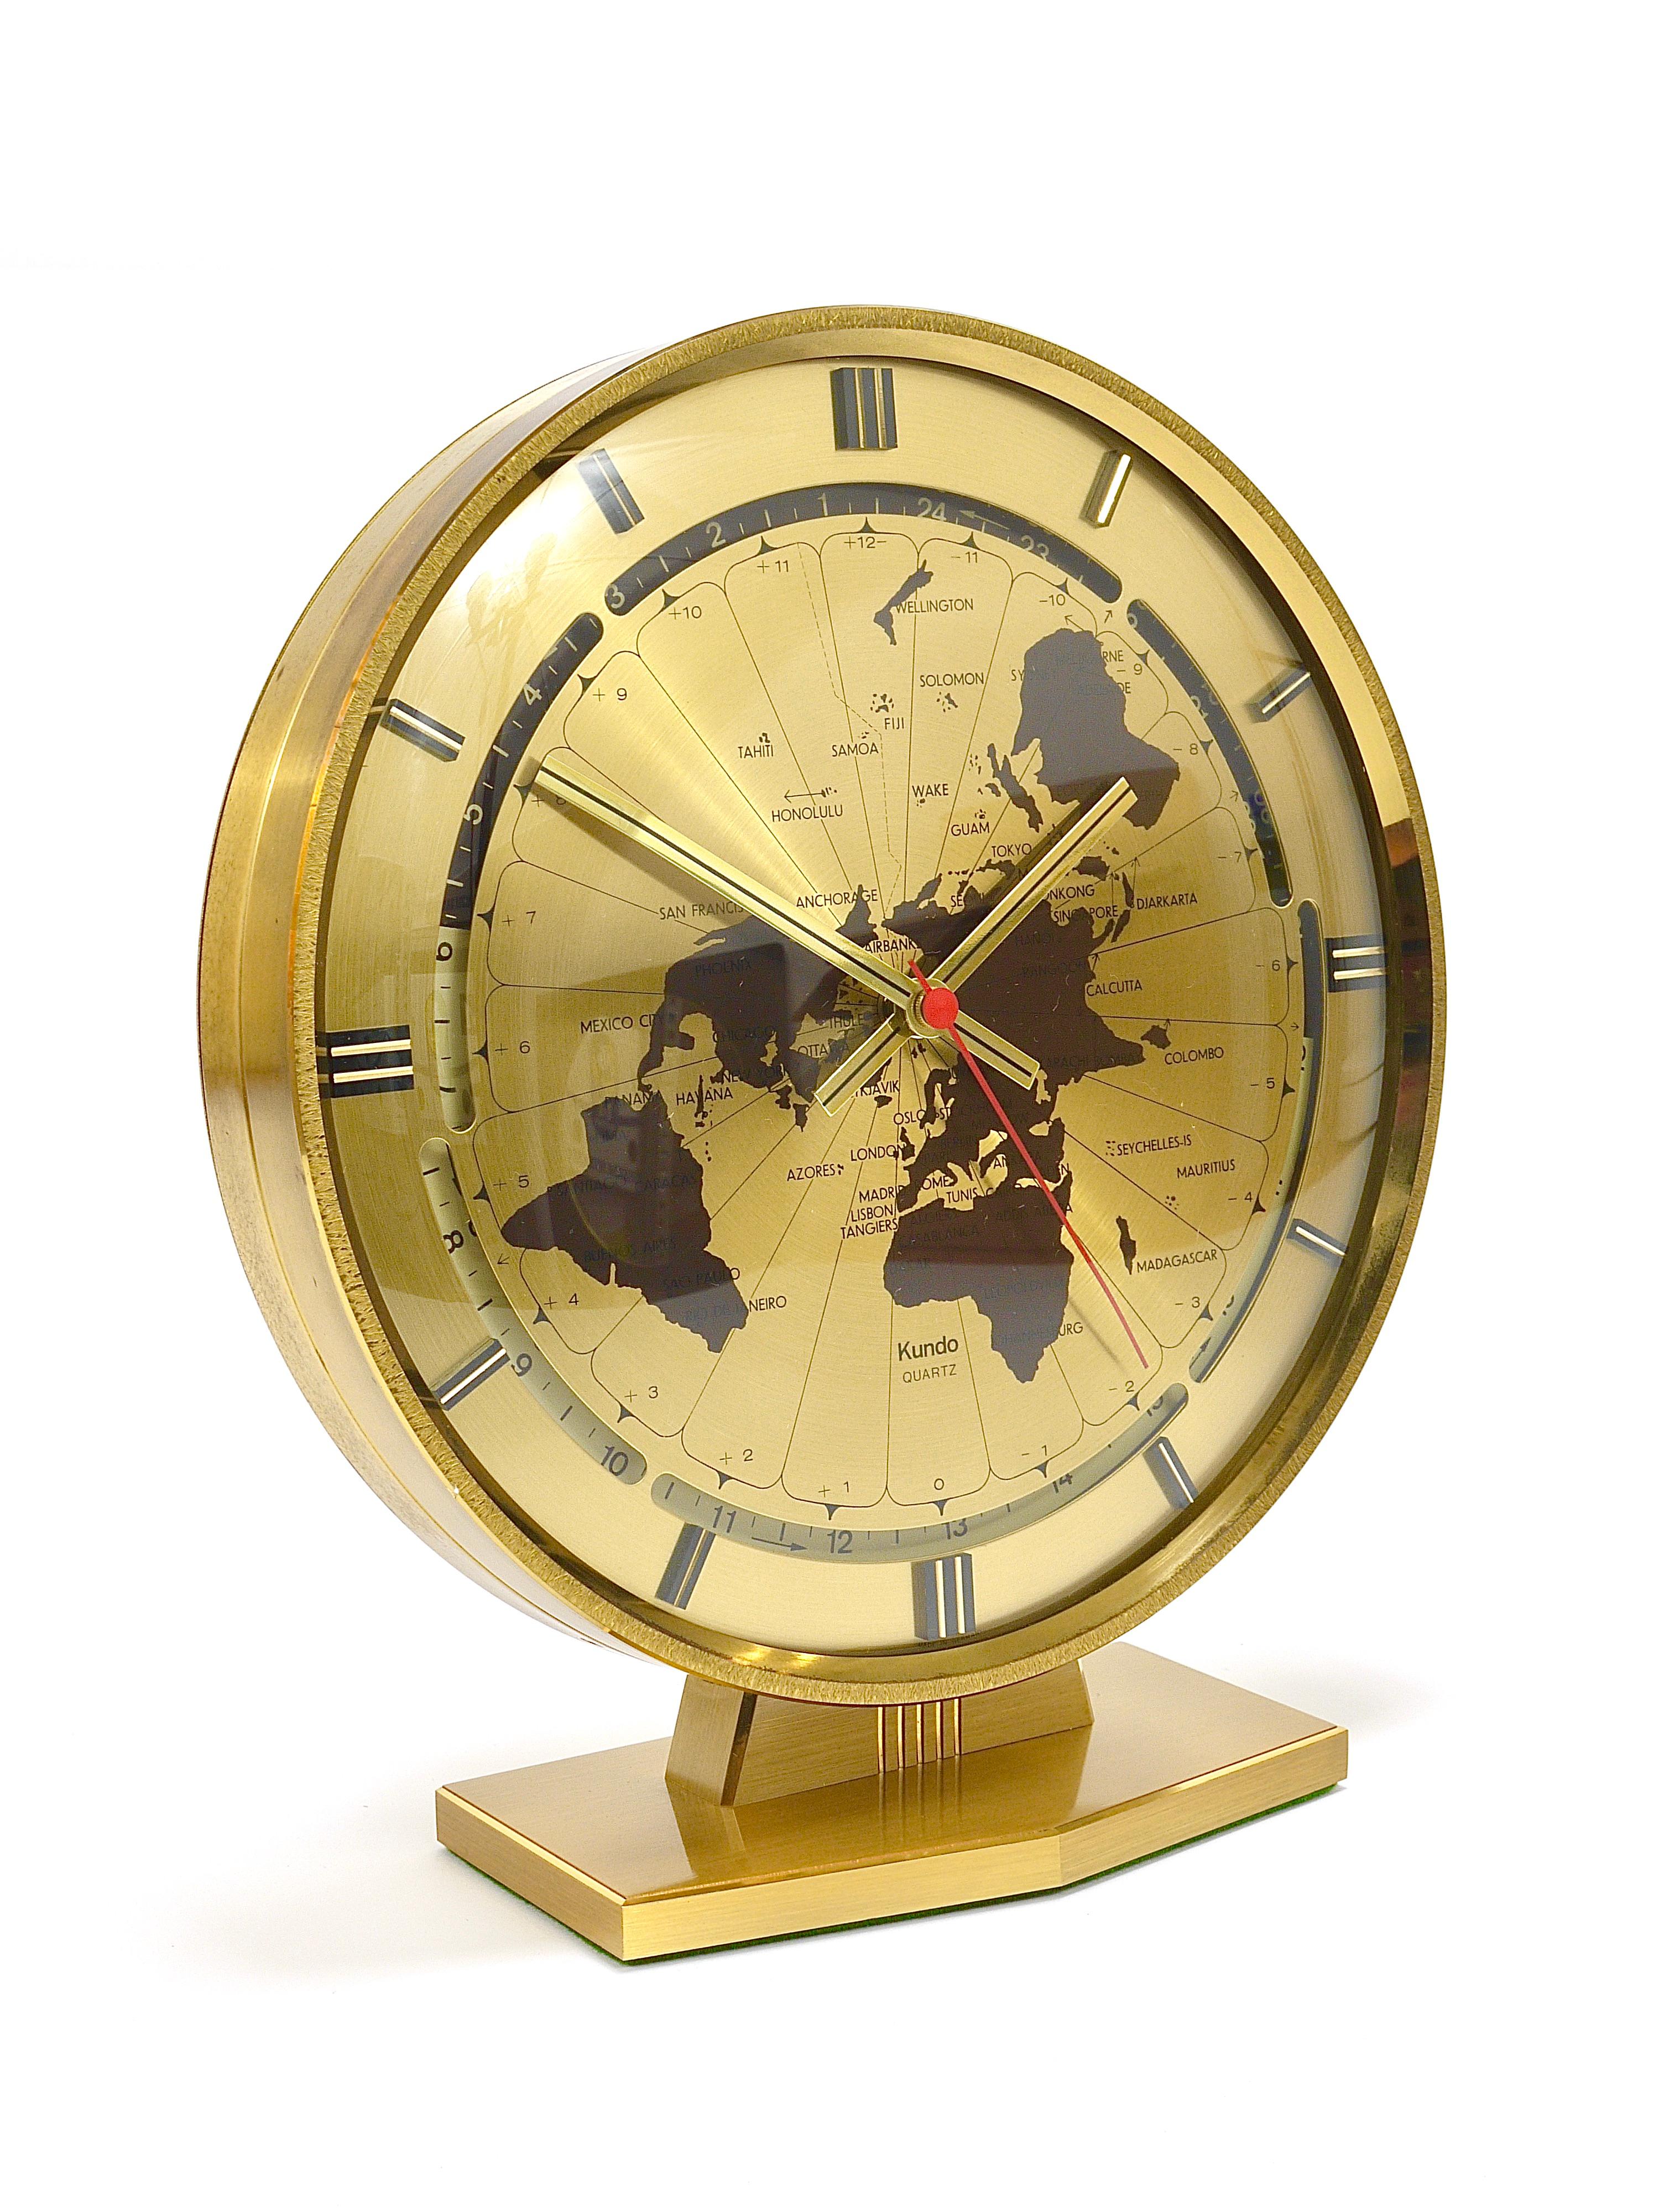 An impressive and large Mid-Century Modernist brass desk or table clock with a 9“ diameter world map clocks face and world time zones. Executed in the 1960s by Kieninger & Obergfell / Kundo in Western Germany. (The brand „Kundo